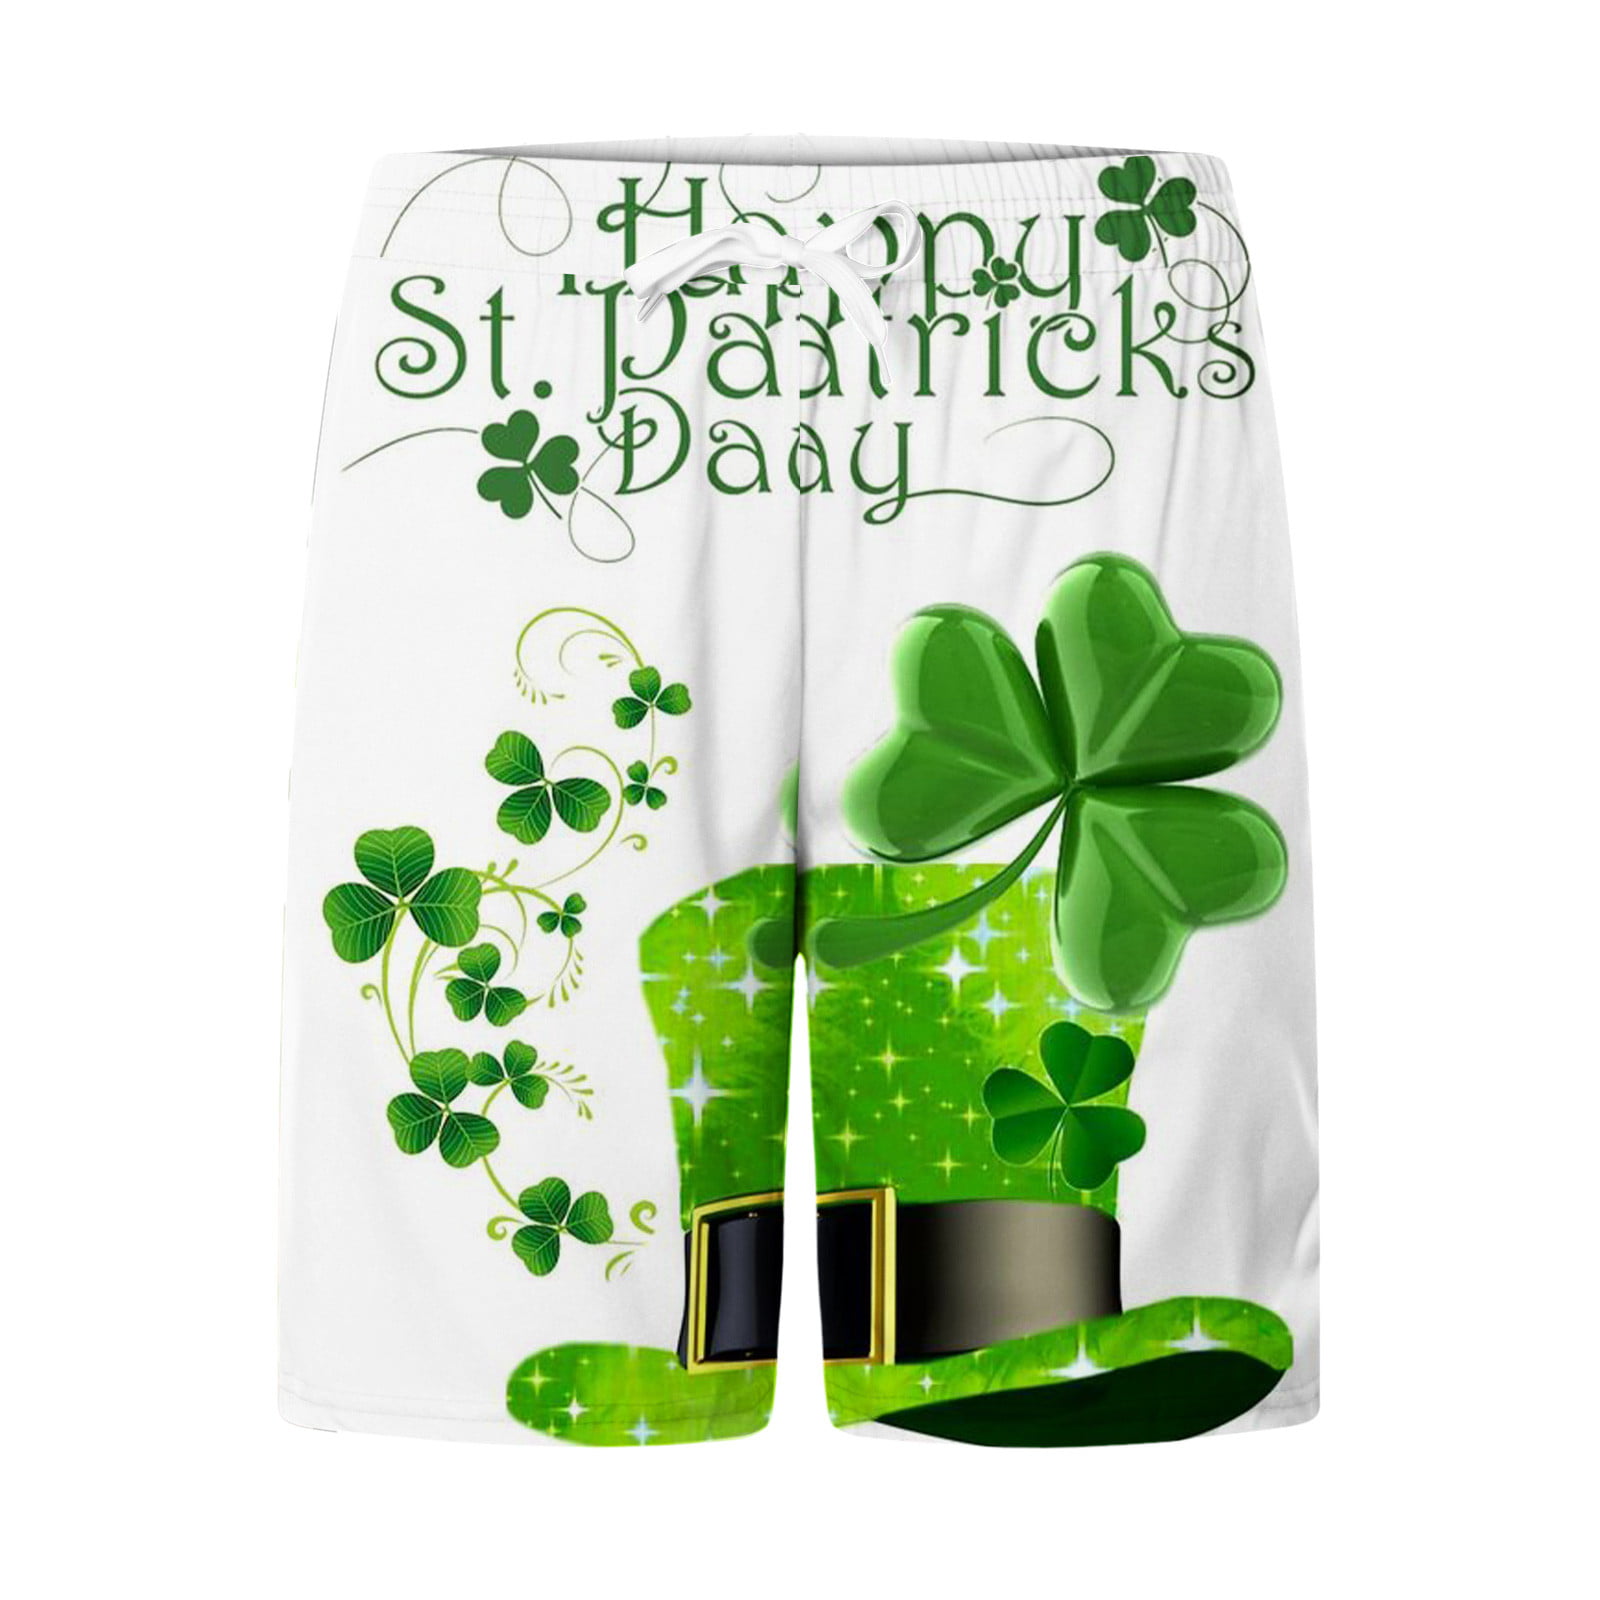 You need these awesome St. Patrick's Day beer accessories » Gadget Flow